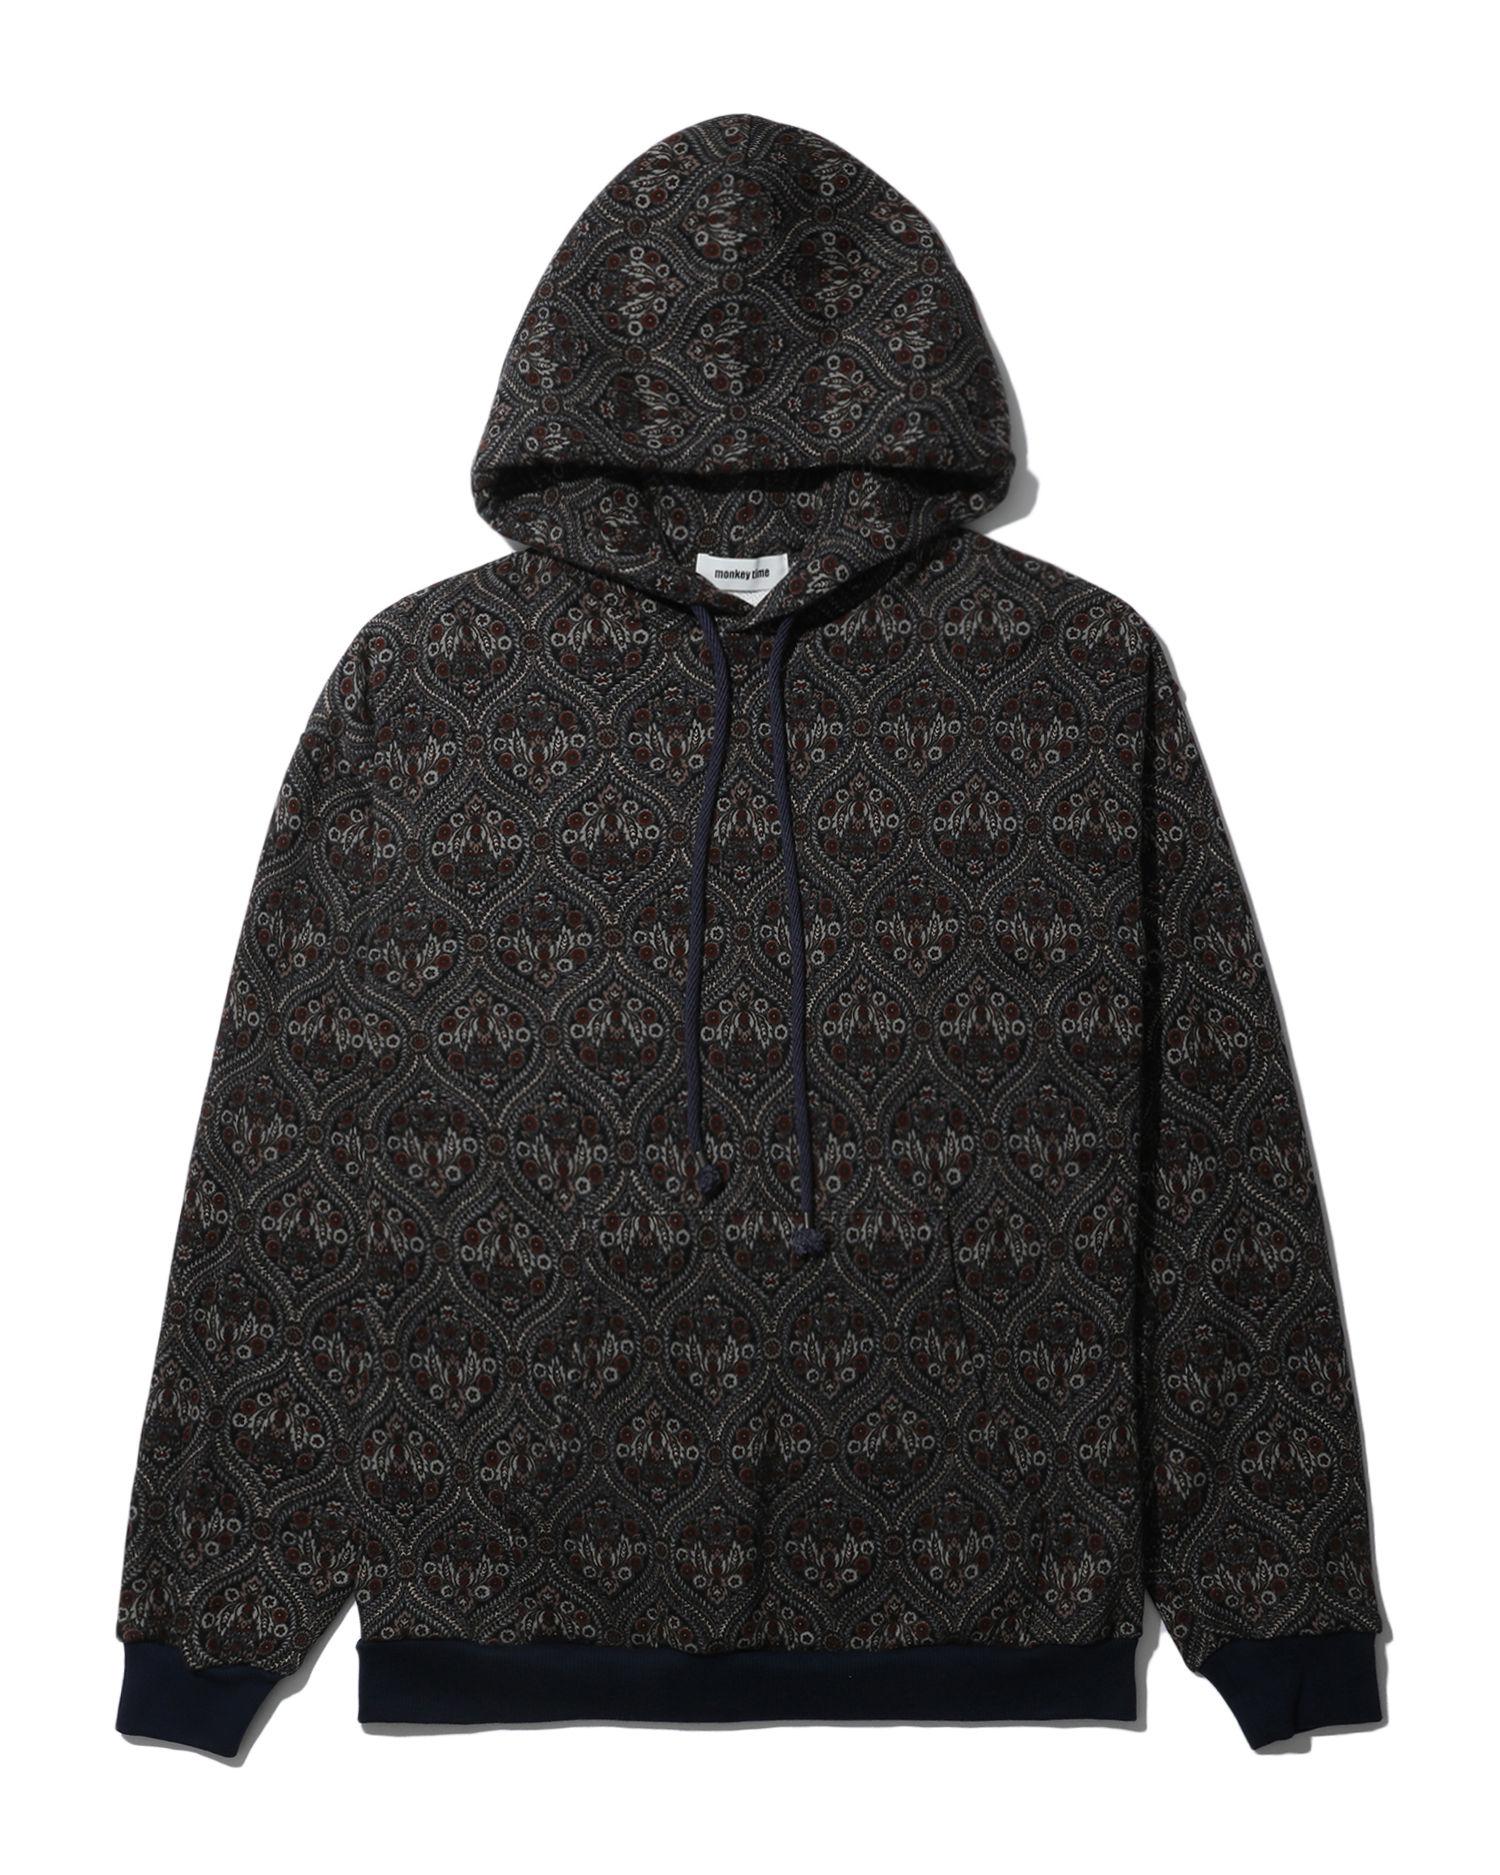 Patterned hoodie by BEAUTY&YOUTH MONKEY TIME